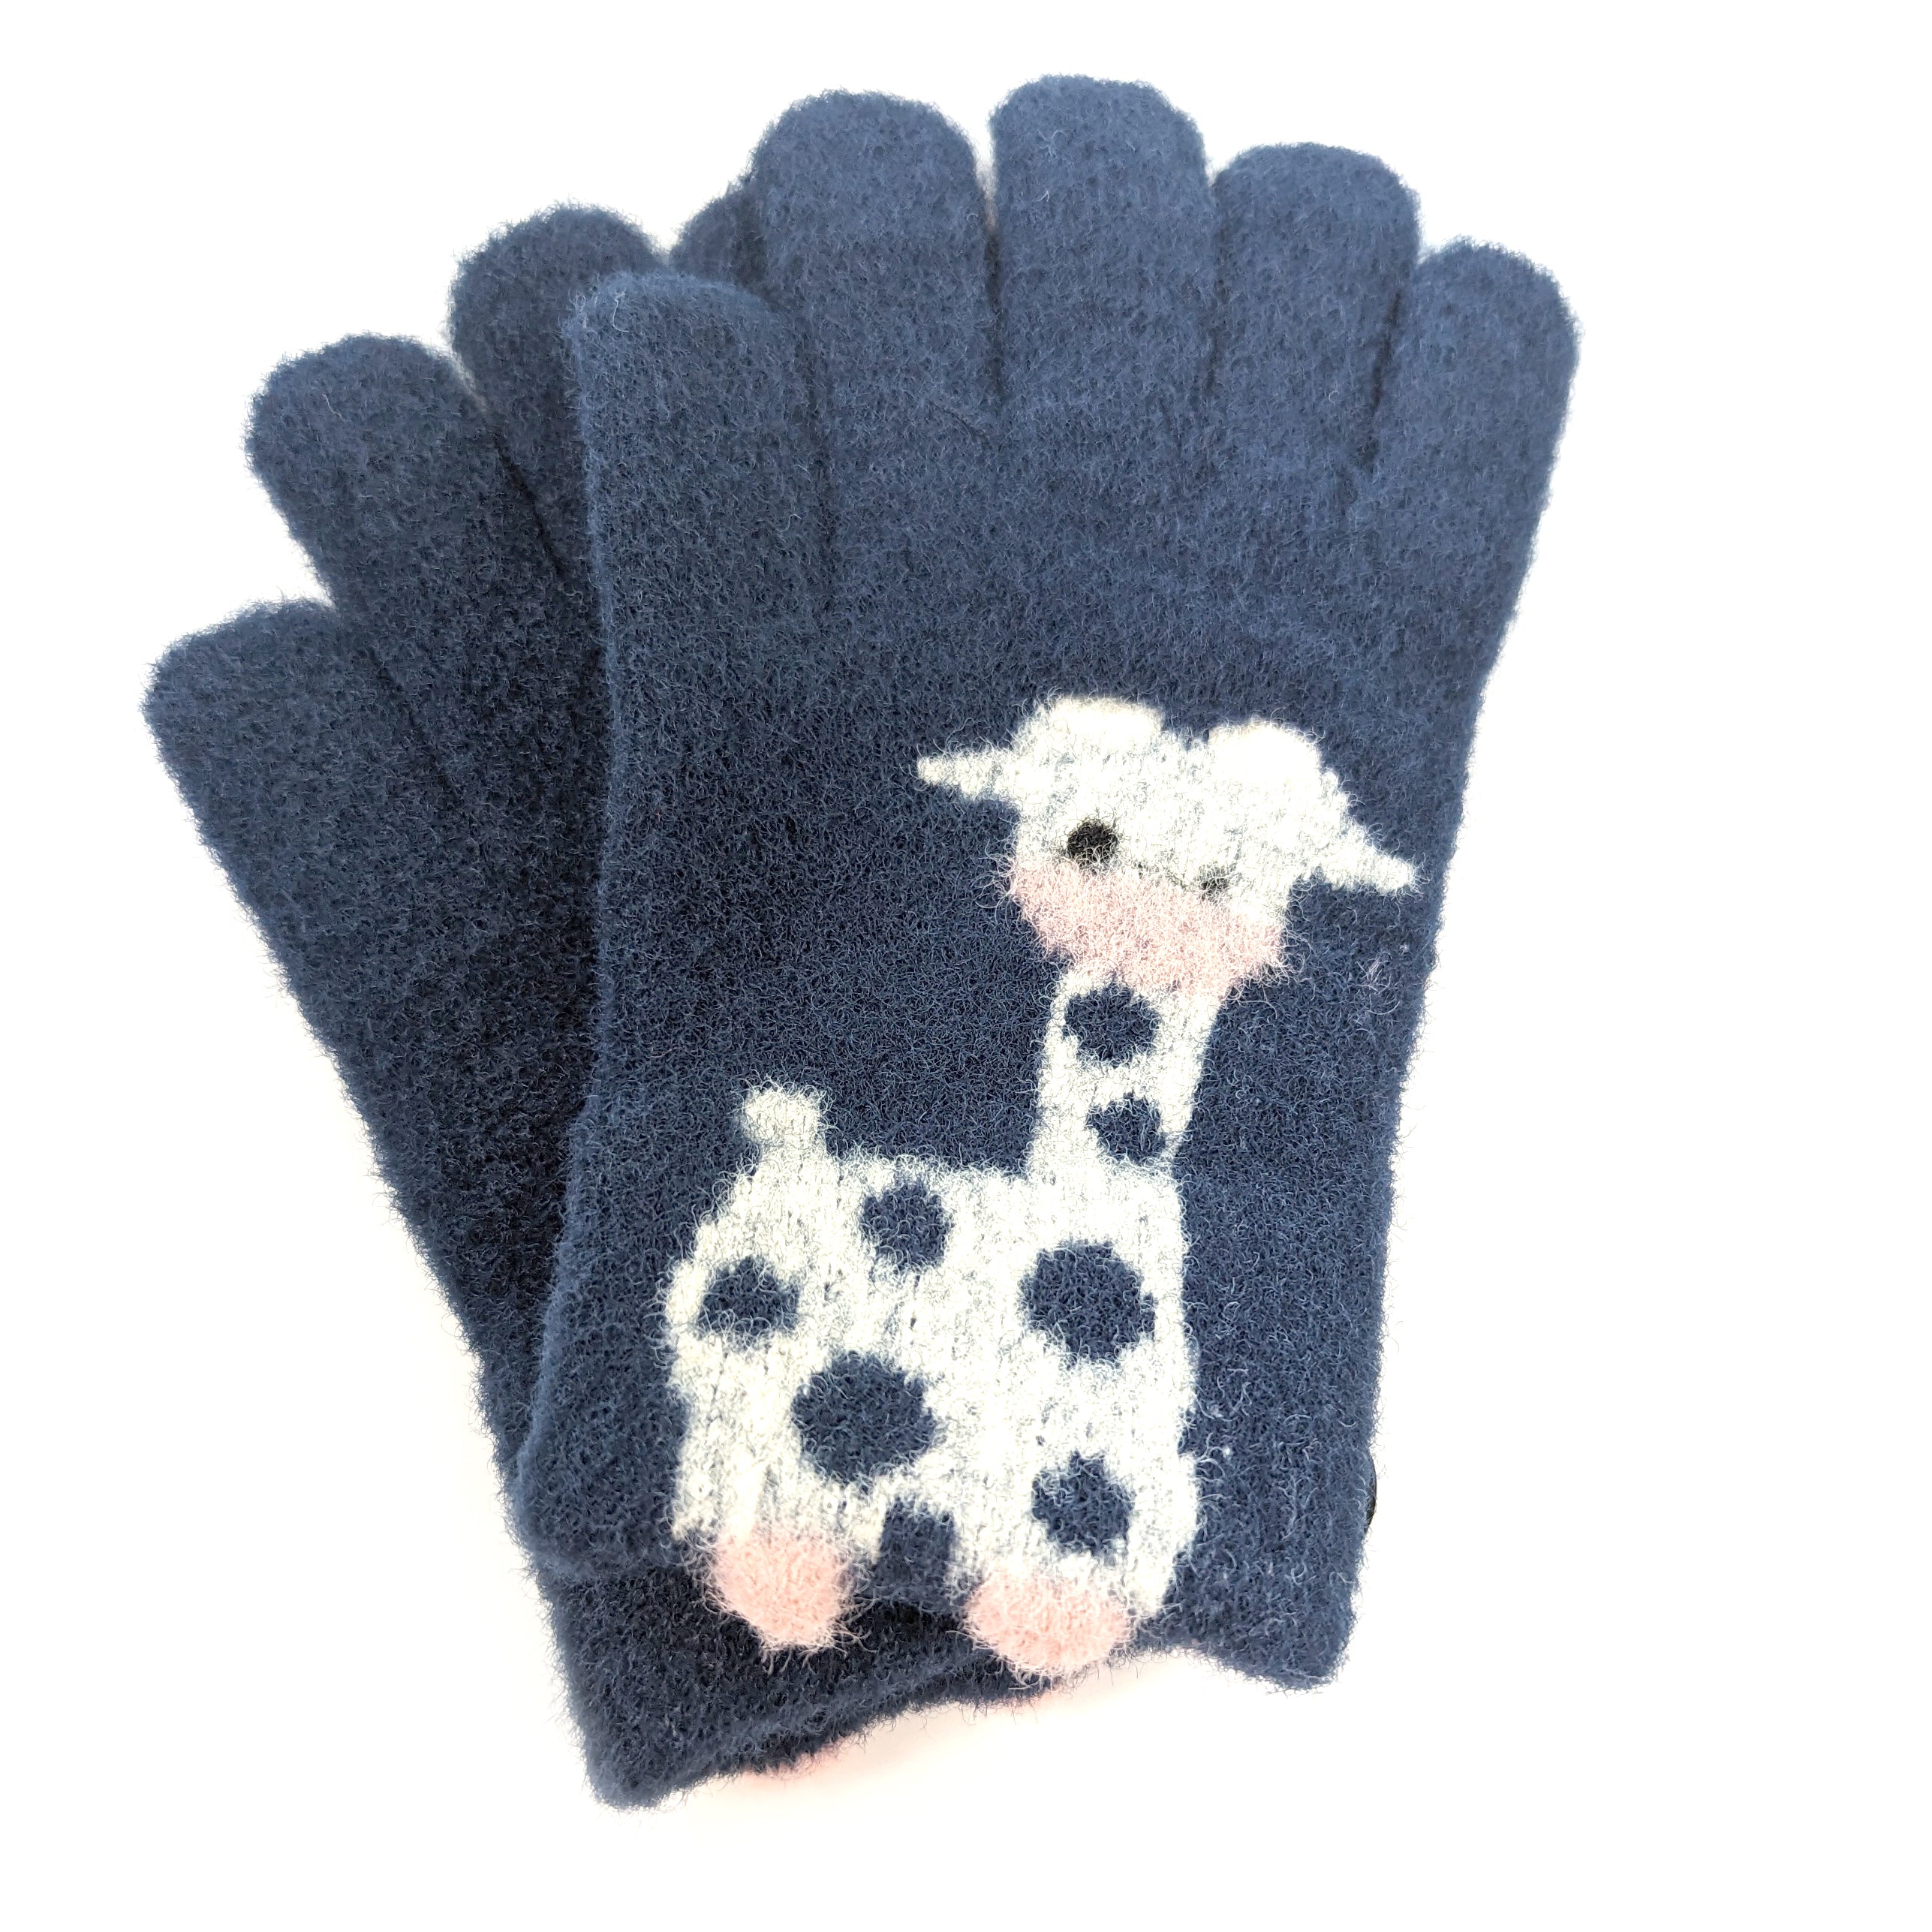 12 Assorted GIraffe Gloves (up to 8 years old)